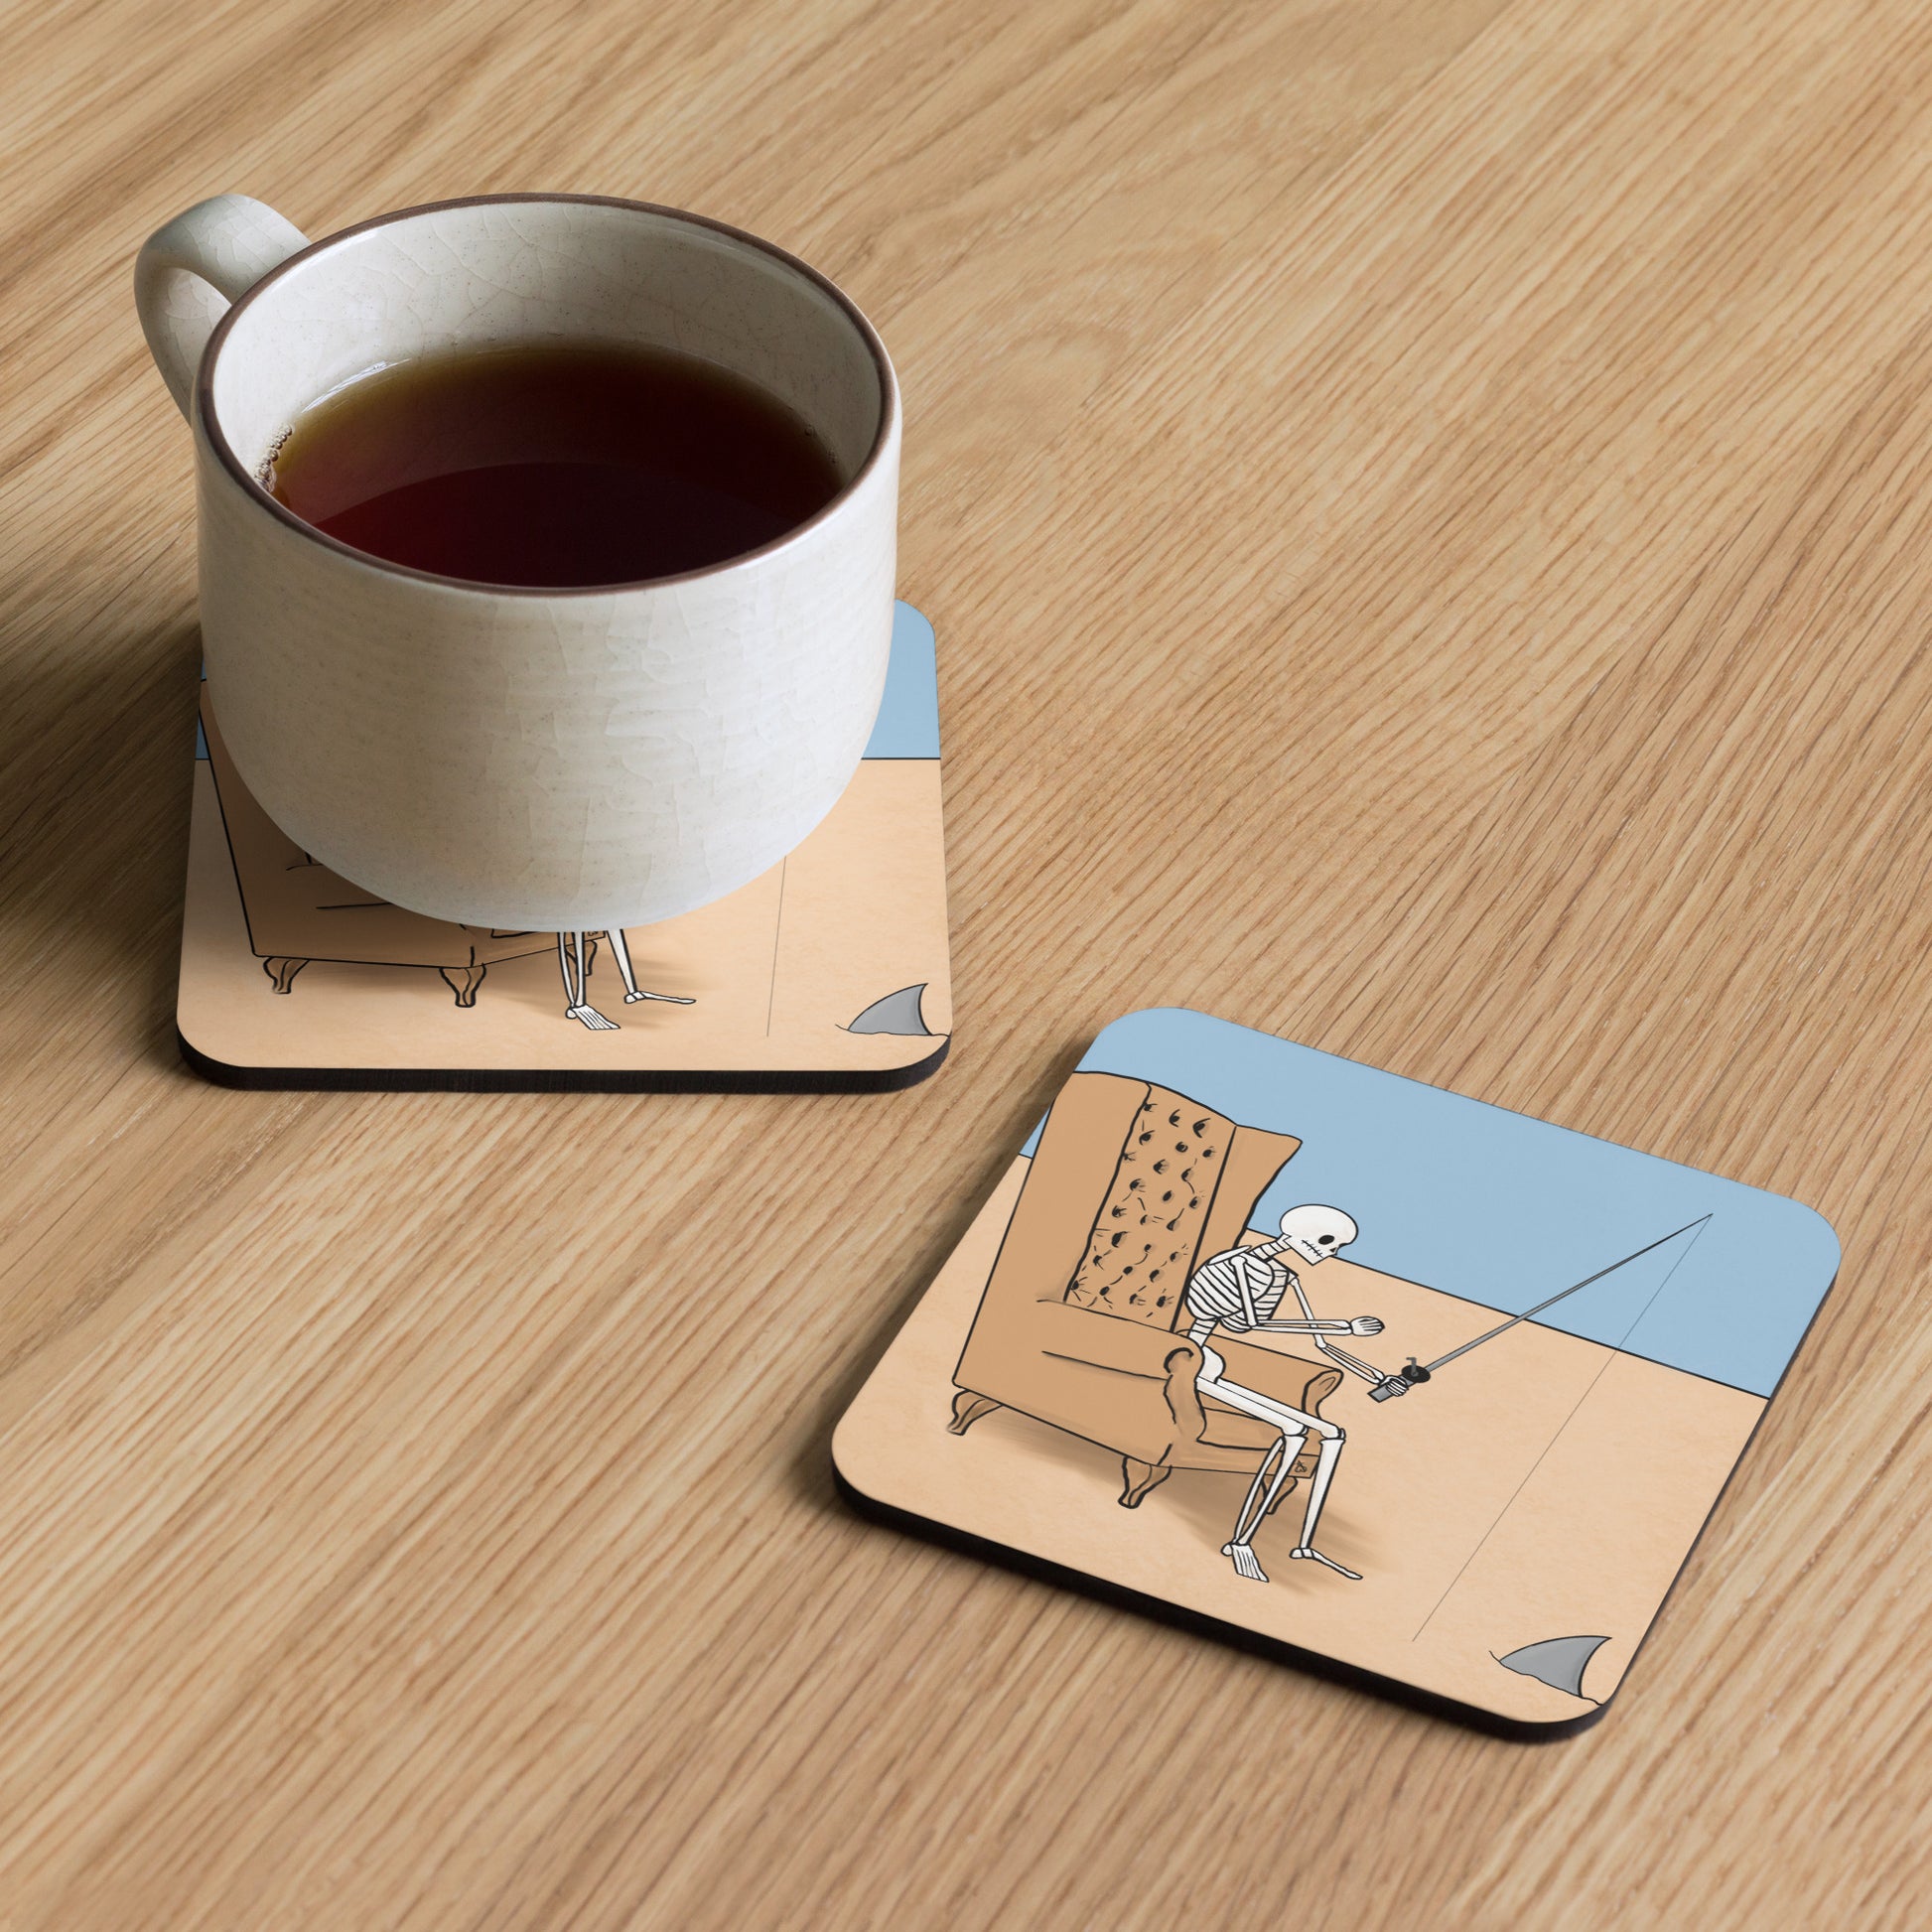 A pair of Dead Fishing coasters sit on a table, one holding a mug of liquid and the other uncovered to show the illustration of a skeleton sitting in a chair fishing in a sea of sand and a shark fin approaching.